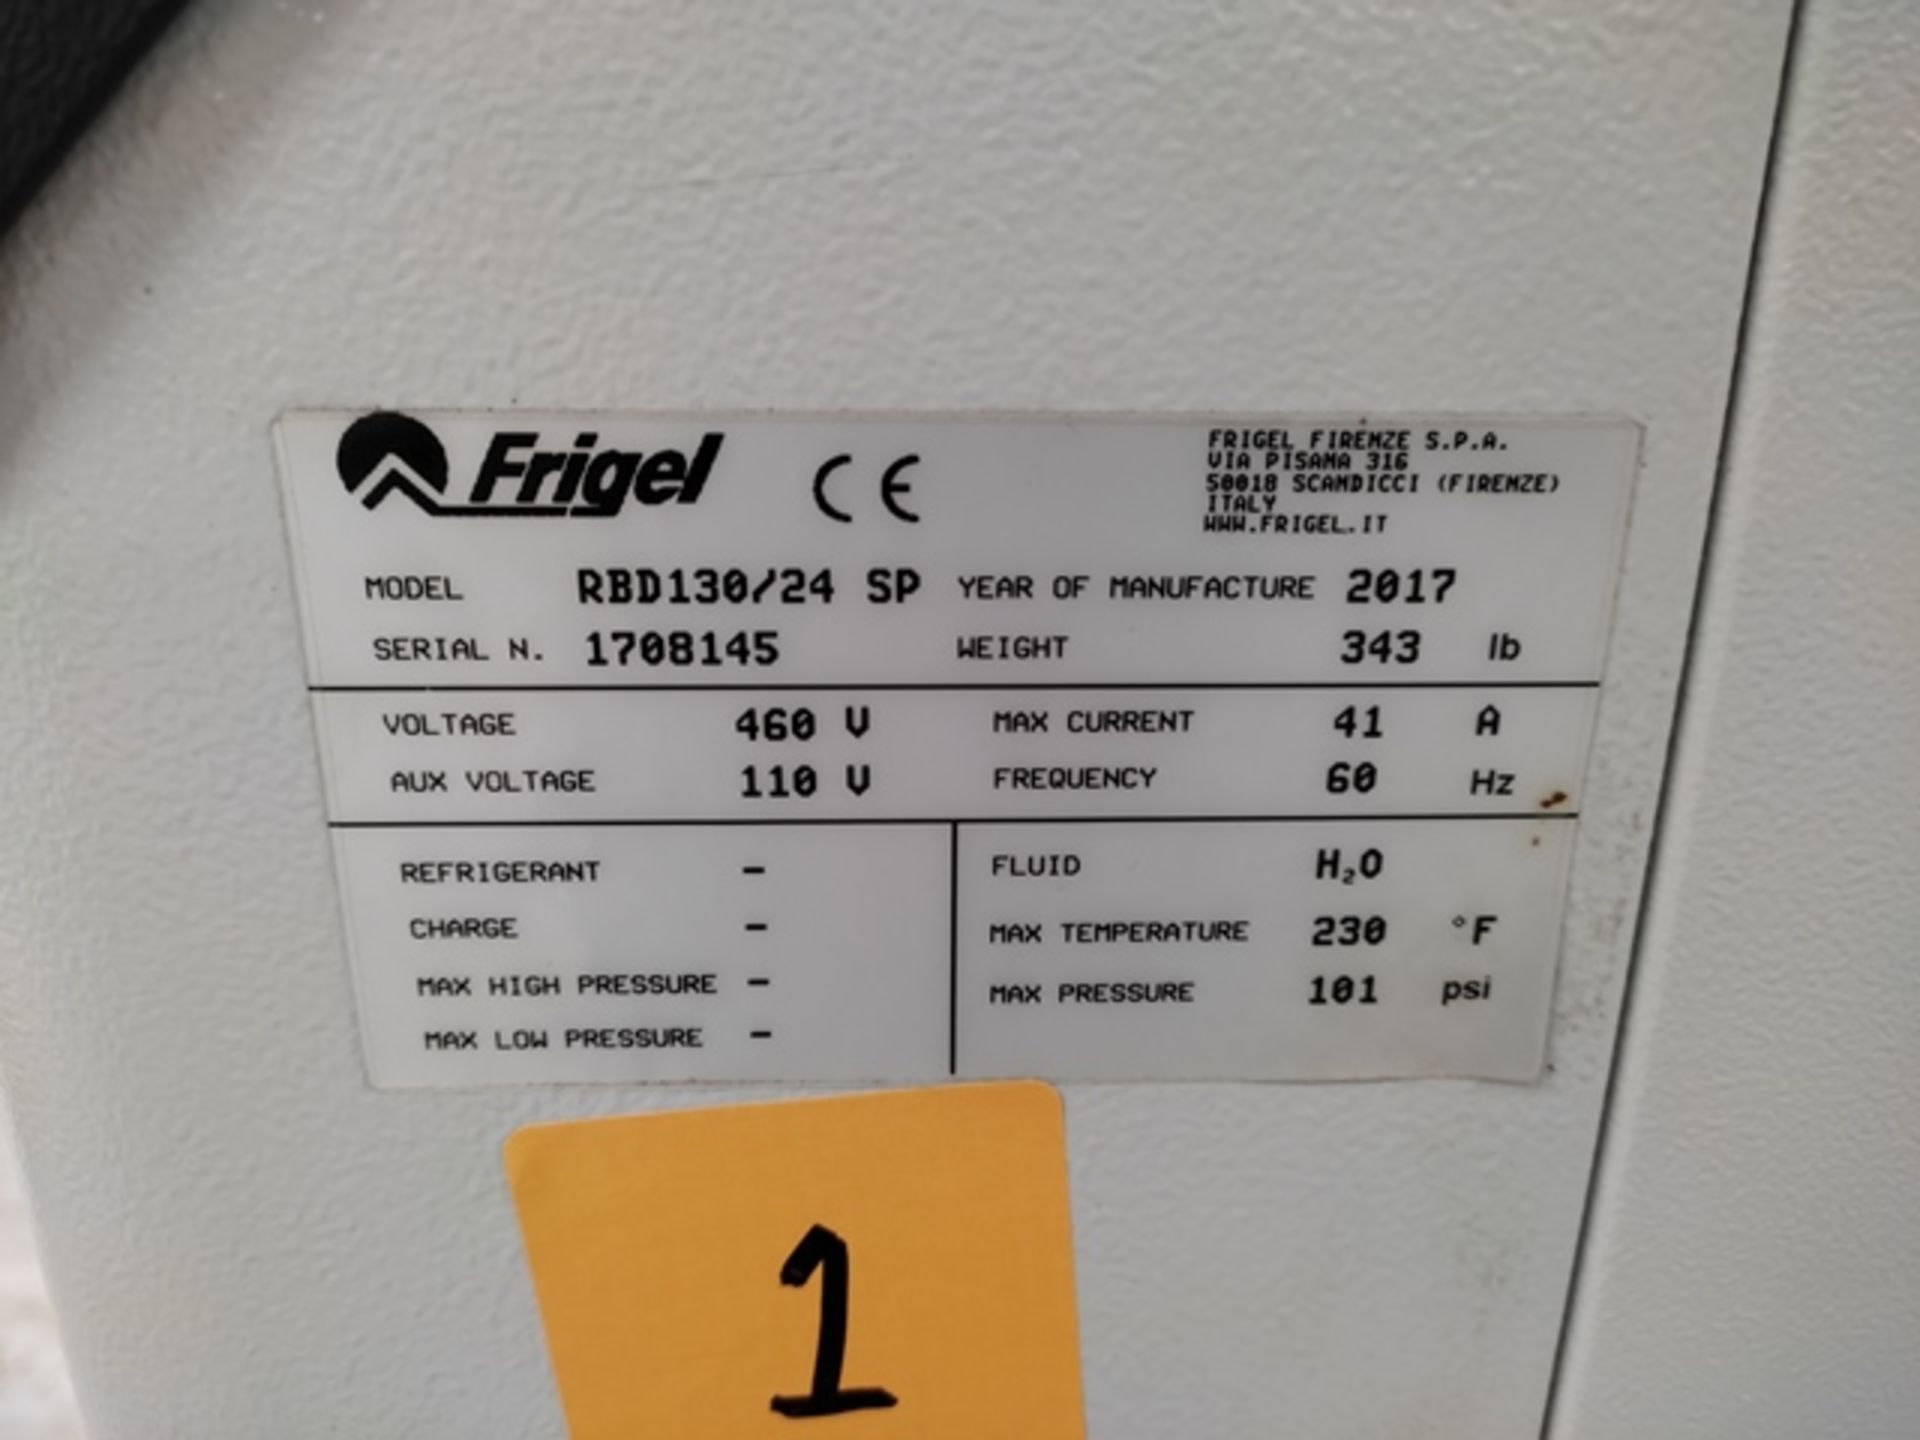 Lot of: (2) Frigel RBD130/24 SP 24 KW Flow Booster Temperature Controller, Mfg. Year: 2017 - Image 10 of 11